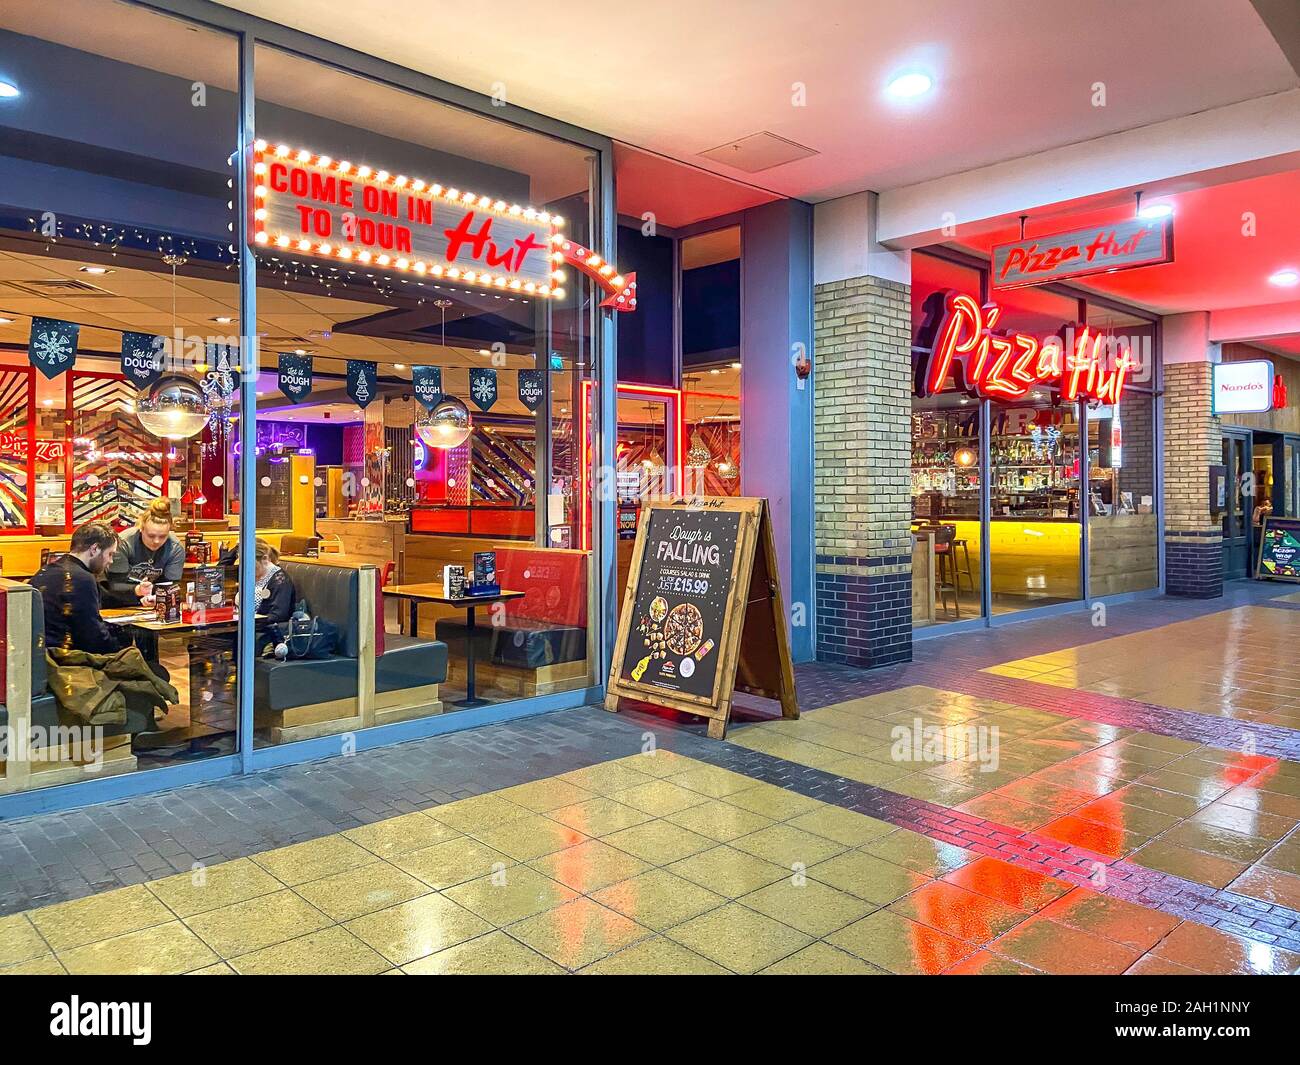 Pizza Hut Restaurant, Two Rivers Shopping Centre, Staines-upon-Thames, Surrey, England, United Kingdom Stock Photo